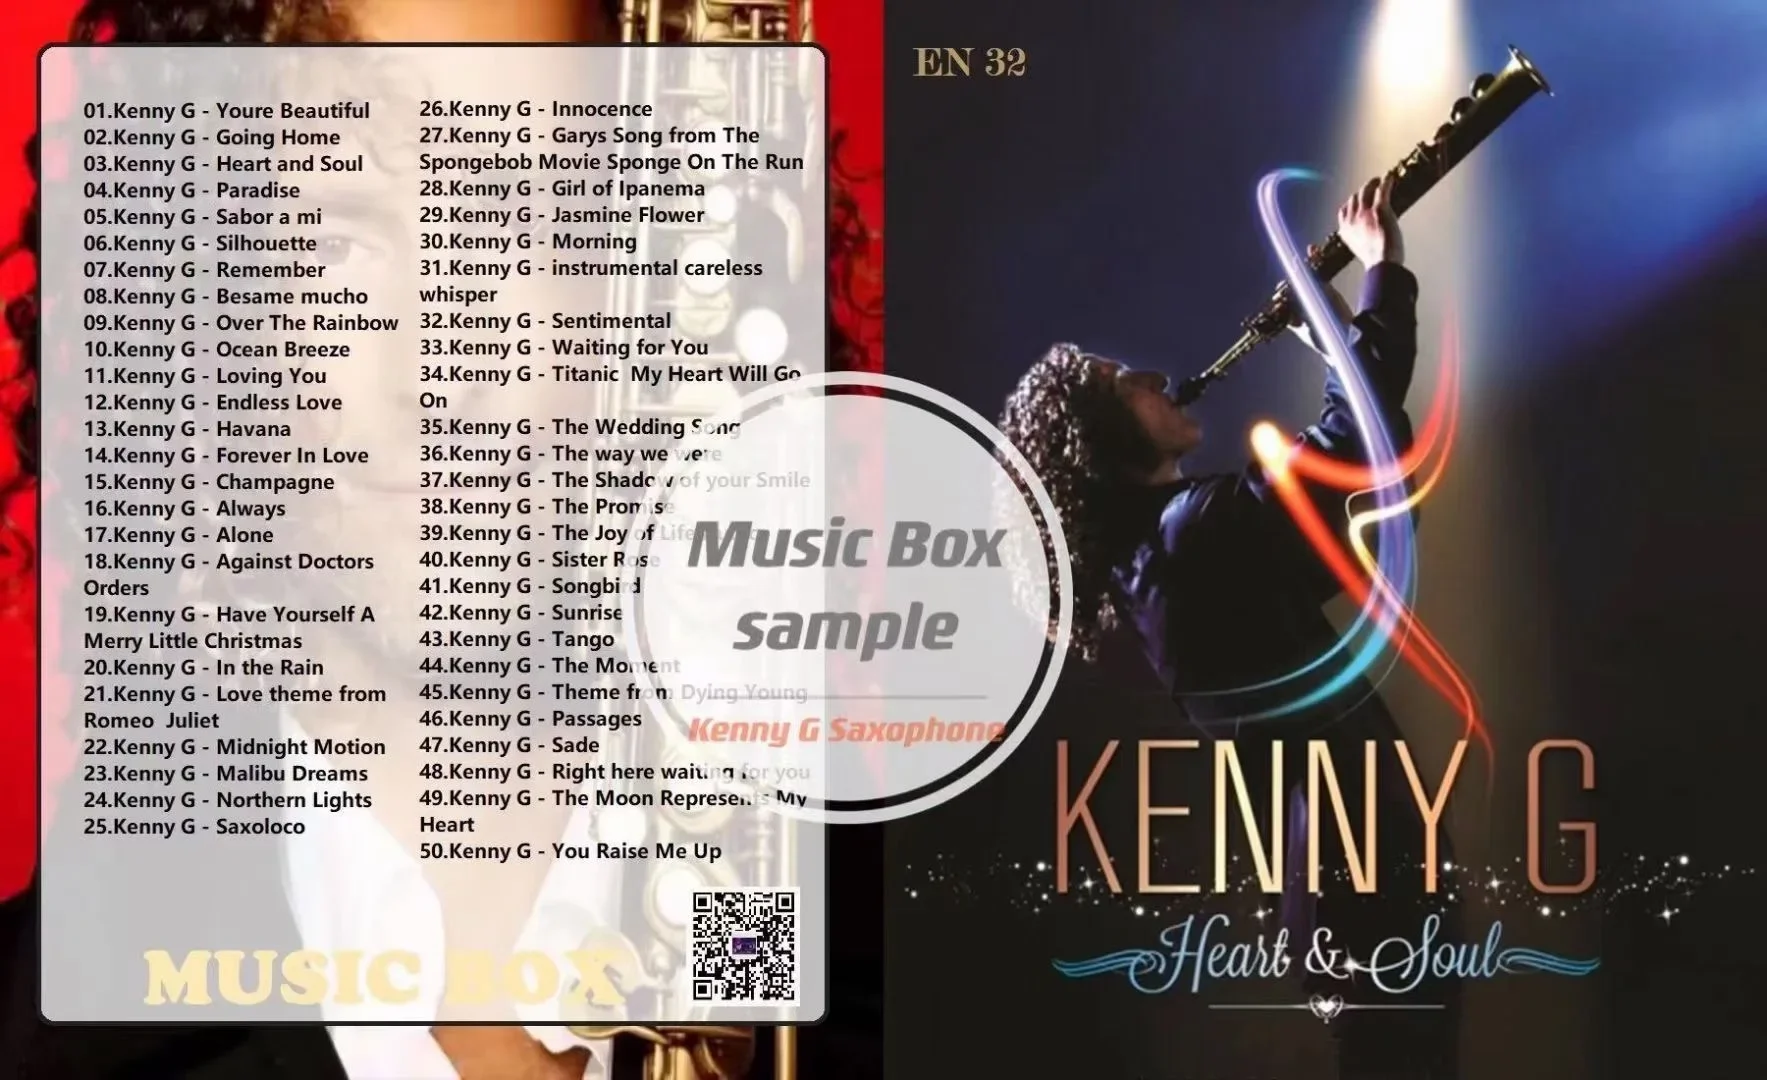 USB pendrive song kenny G heart @ soul music